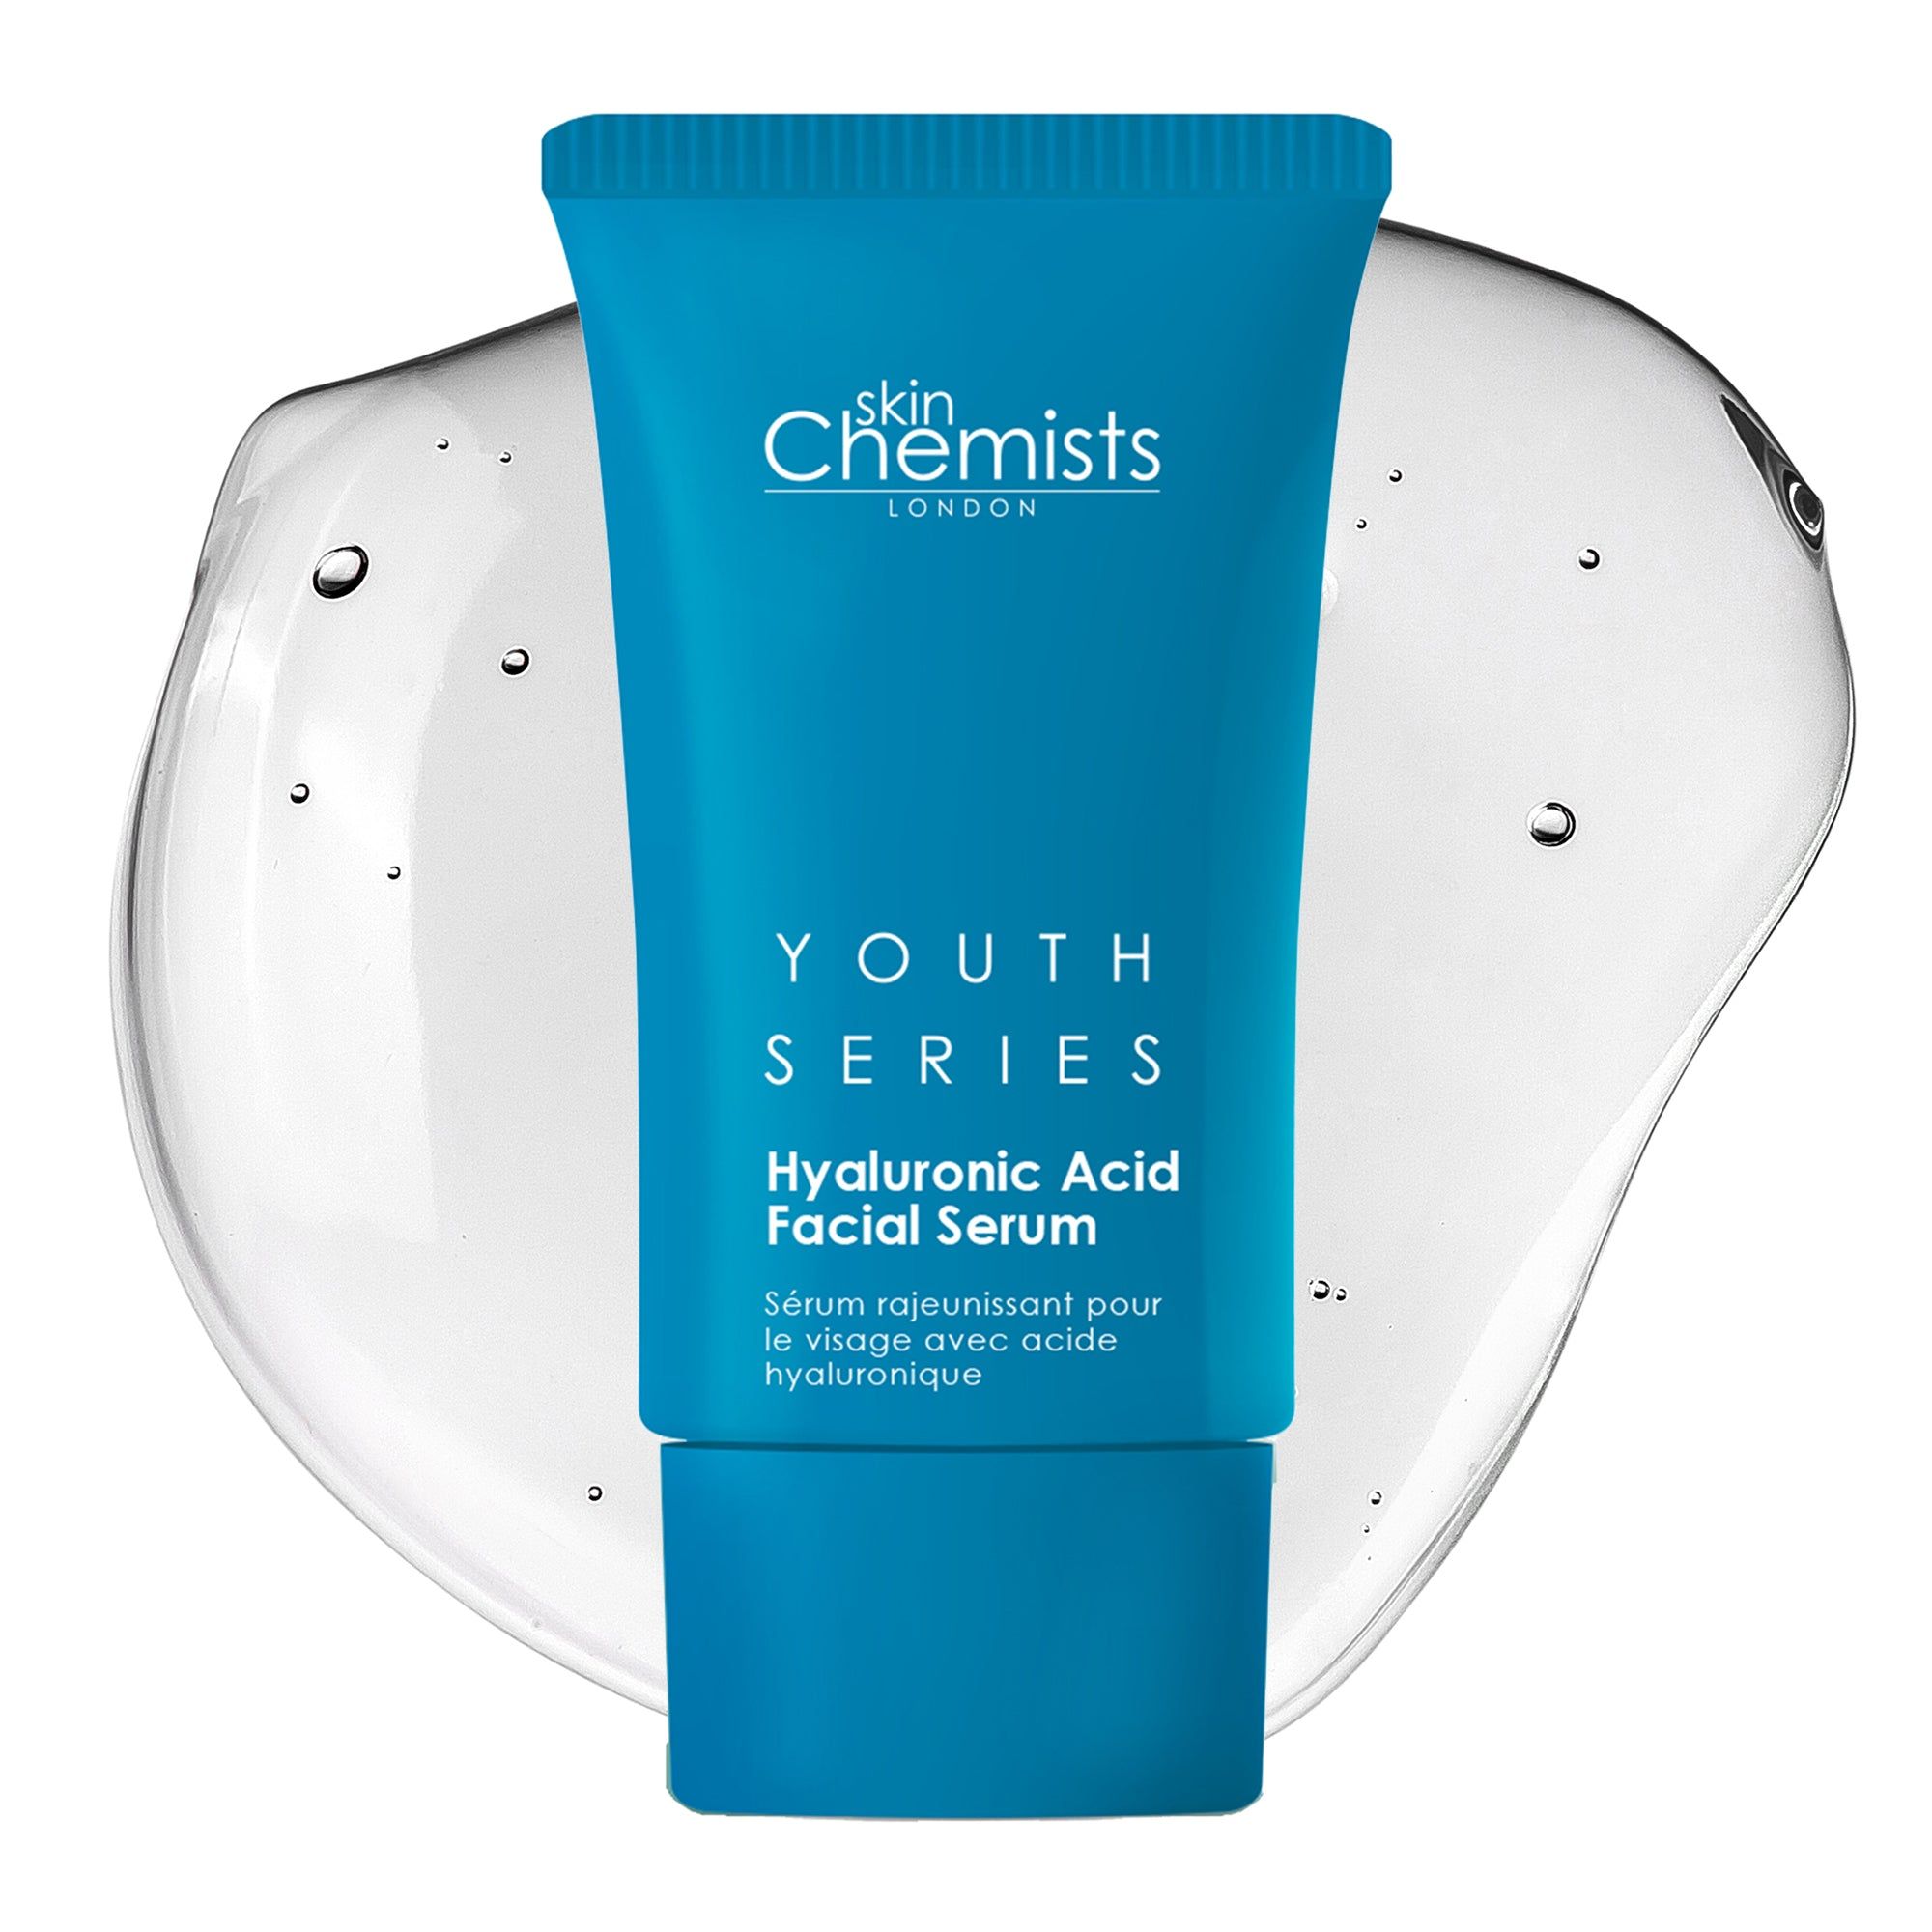 skinChemists Youth Series  Hyaluronic Acid Facial Serum